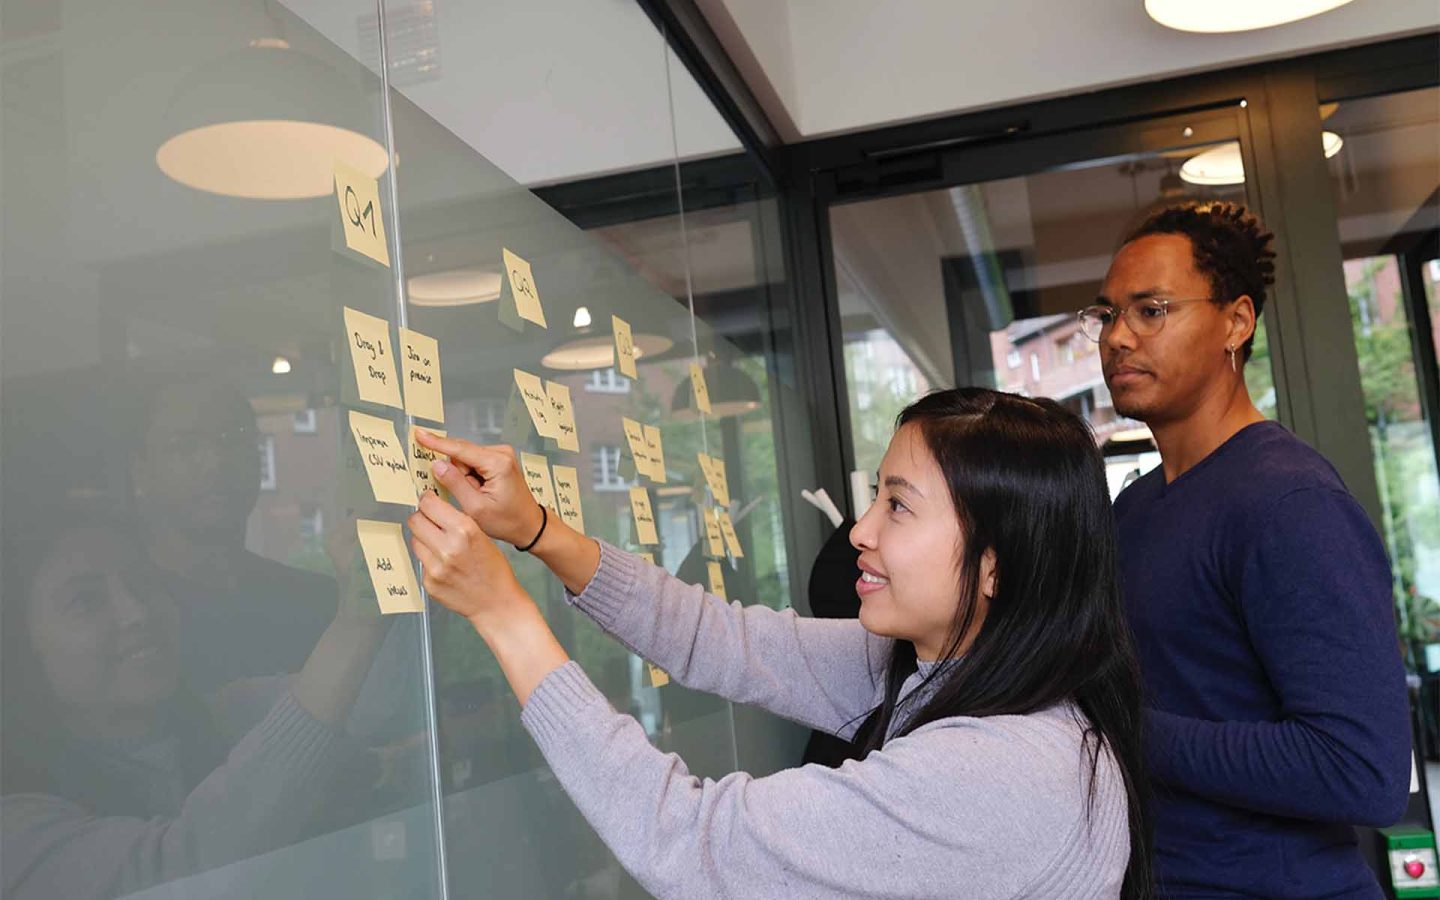 two people creating a process with post it notes stuck on a glass wall